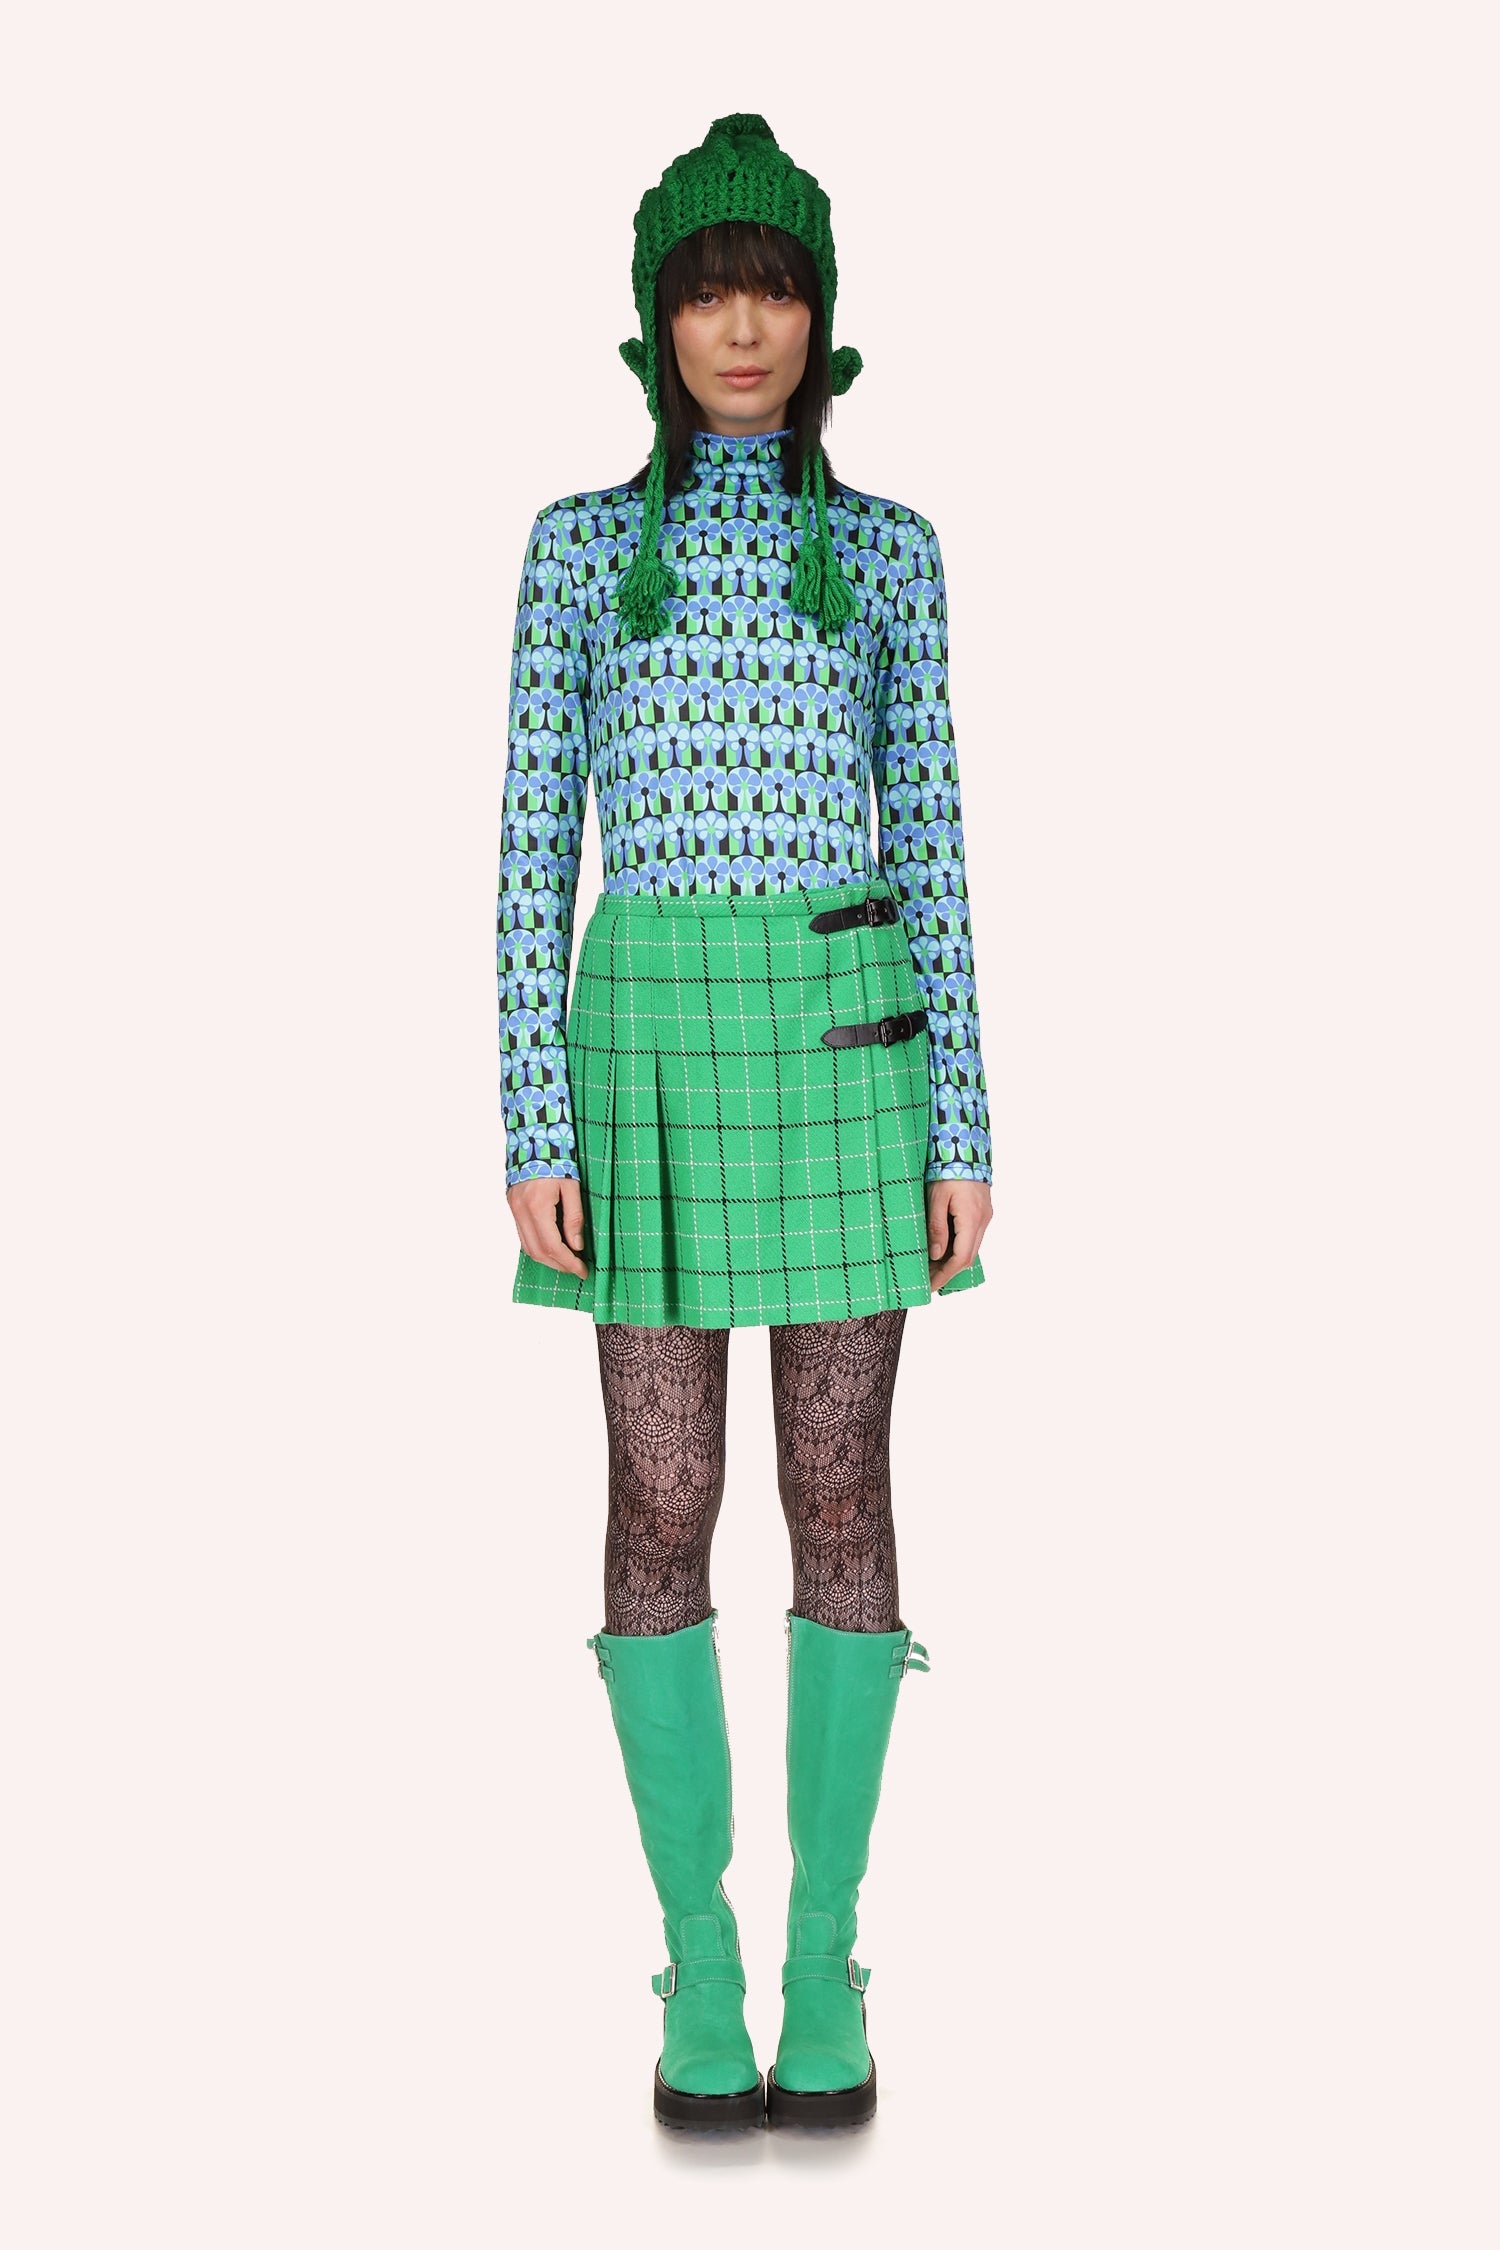  Anna Sui Turtleneck, long sleeves, horizontal pattern of round light green and blue florals and dark green background